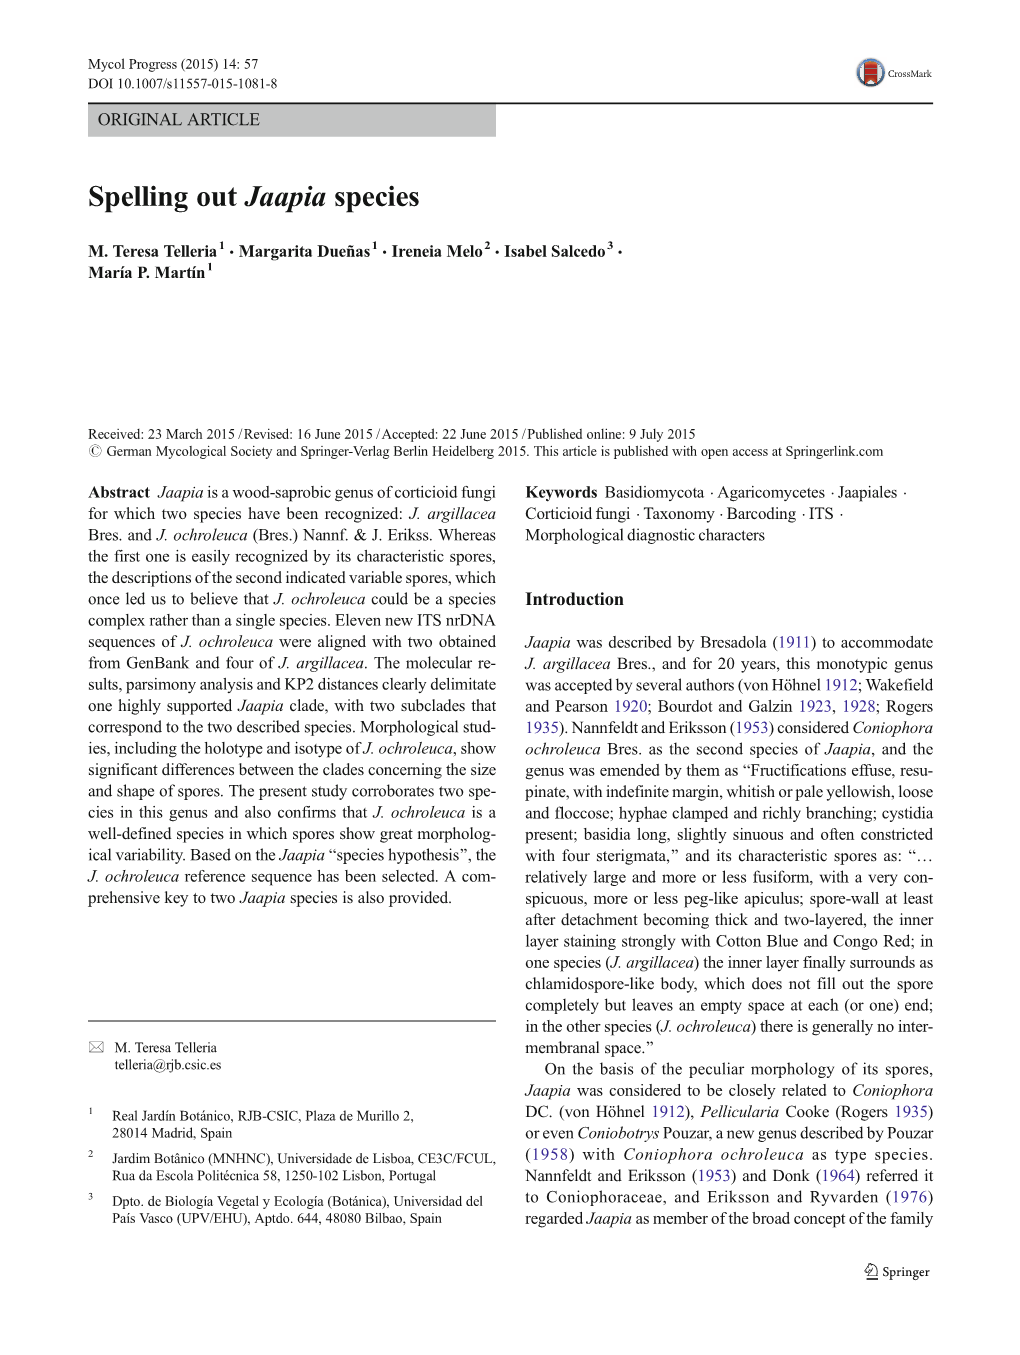 Spelling out Jaapia Species